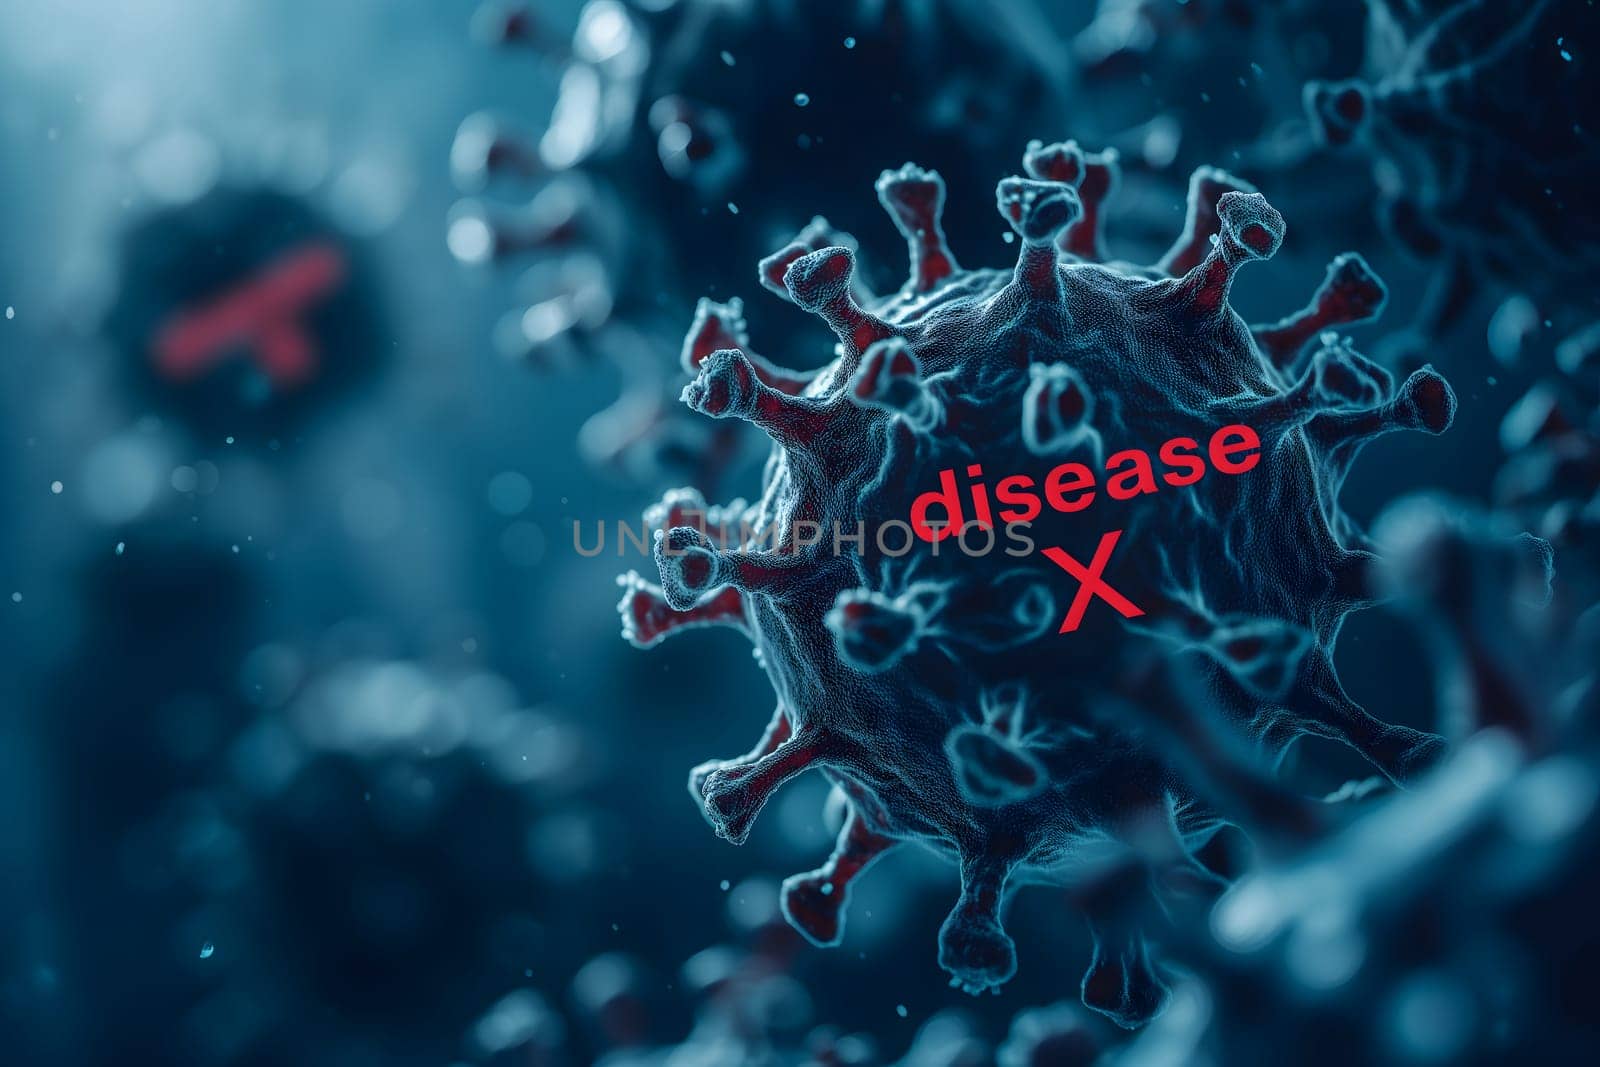 Disease X conceptual composition with coronaviruses for new pandemic topic. Neural network generated image. Not based on any actual scene or pattern.